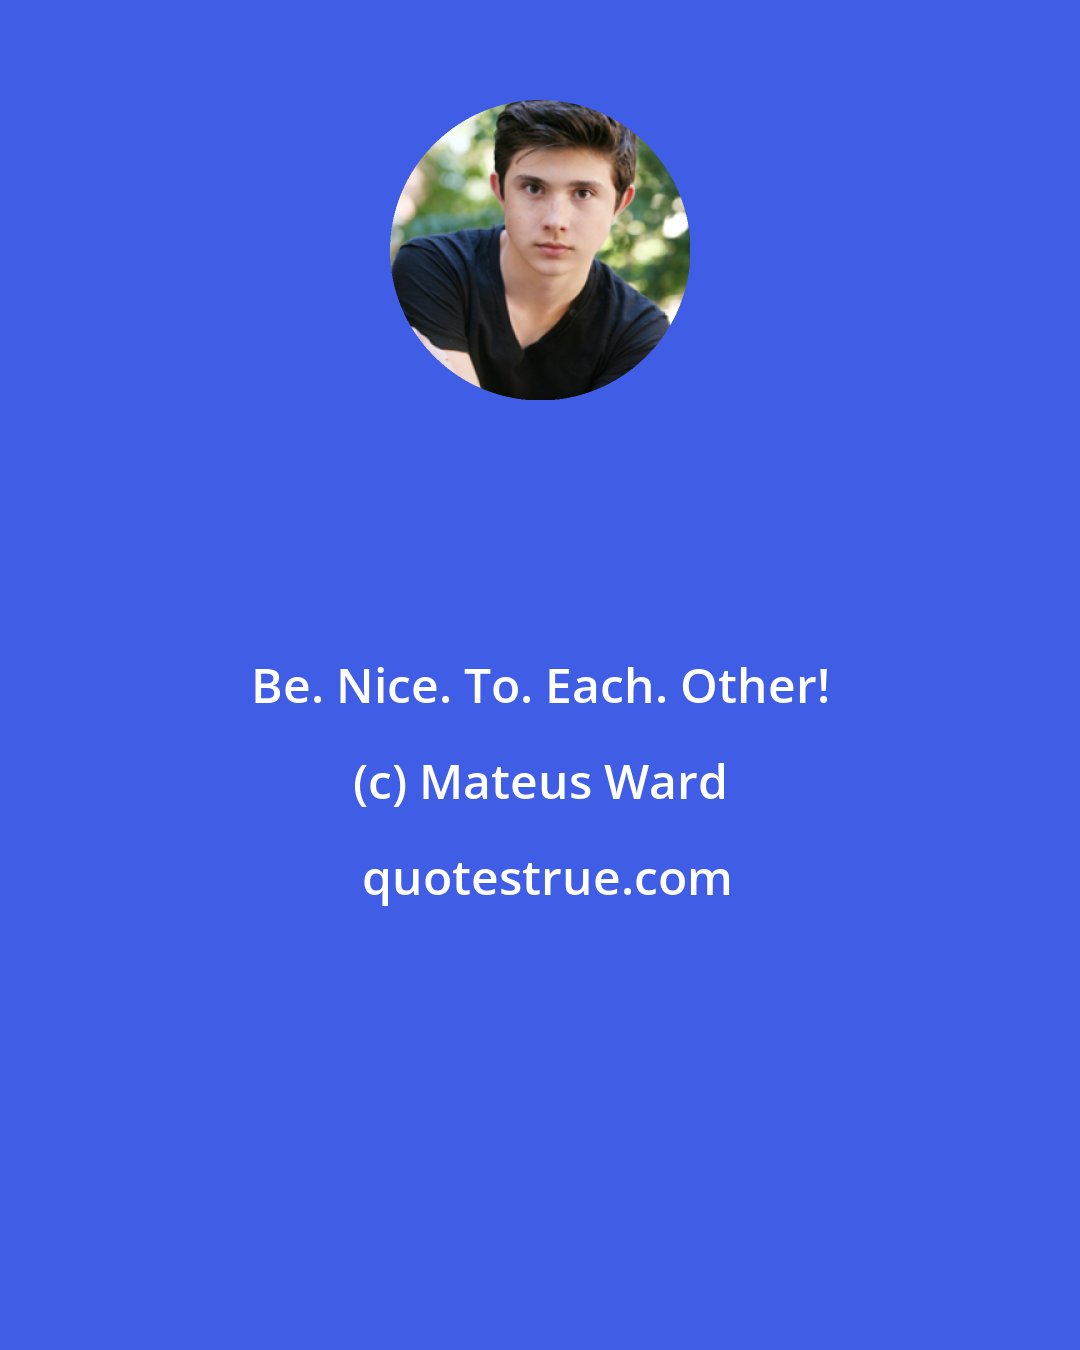 Mateus Ward: Be. Nice. To. Each. Other!